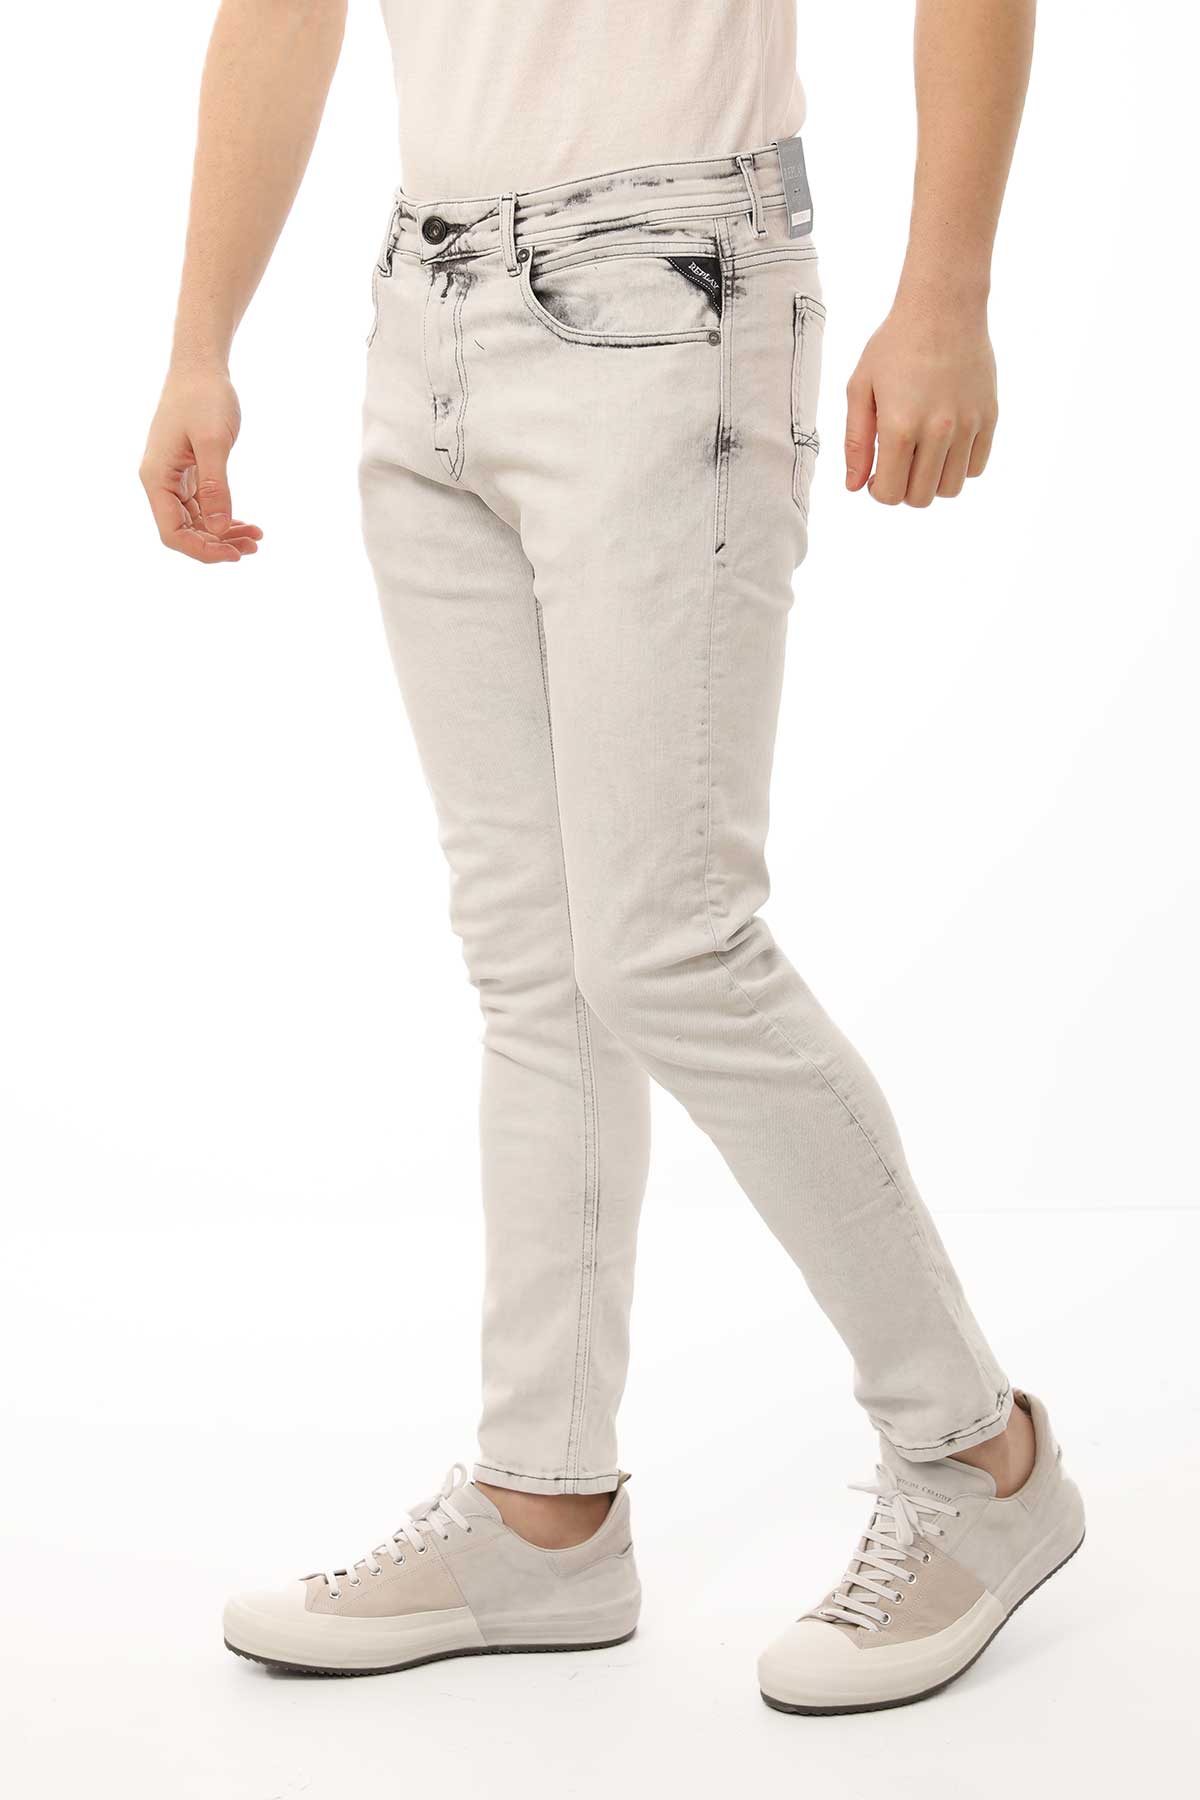 Replay Johnfrus Slim Fit Jeans-Libas Trendy Fashion Store